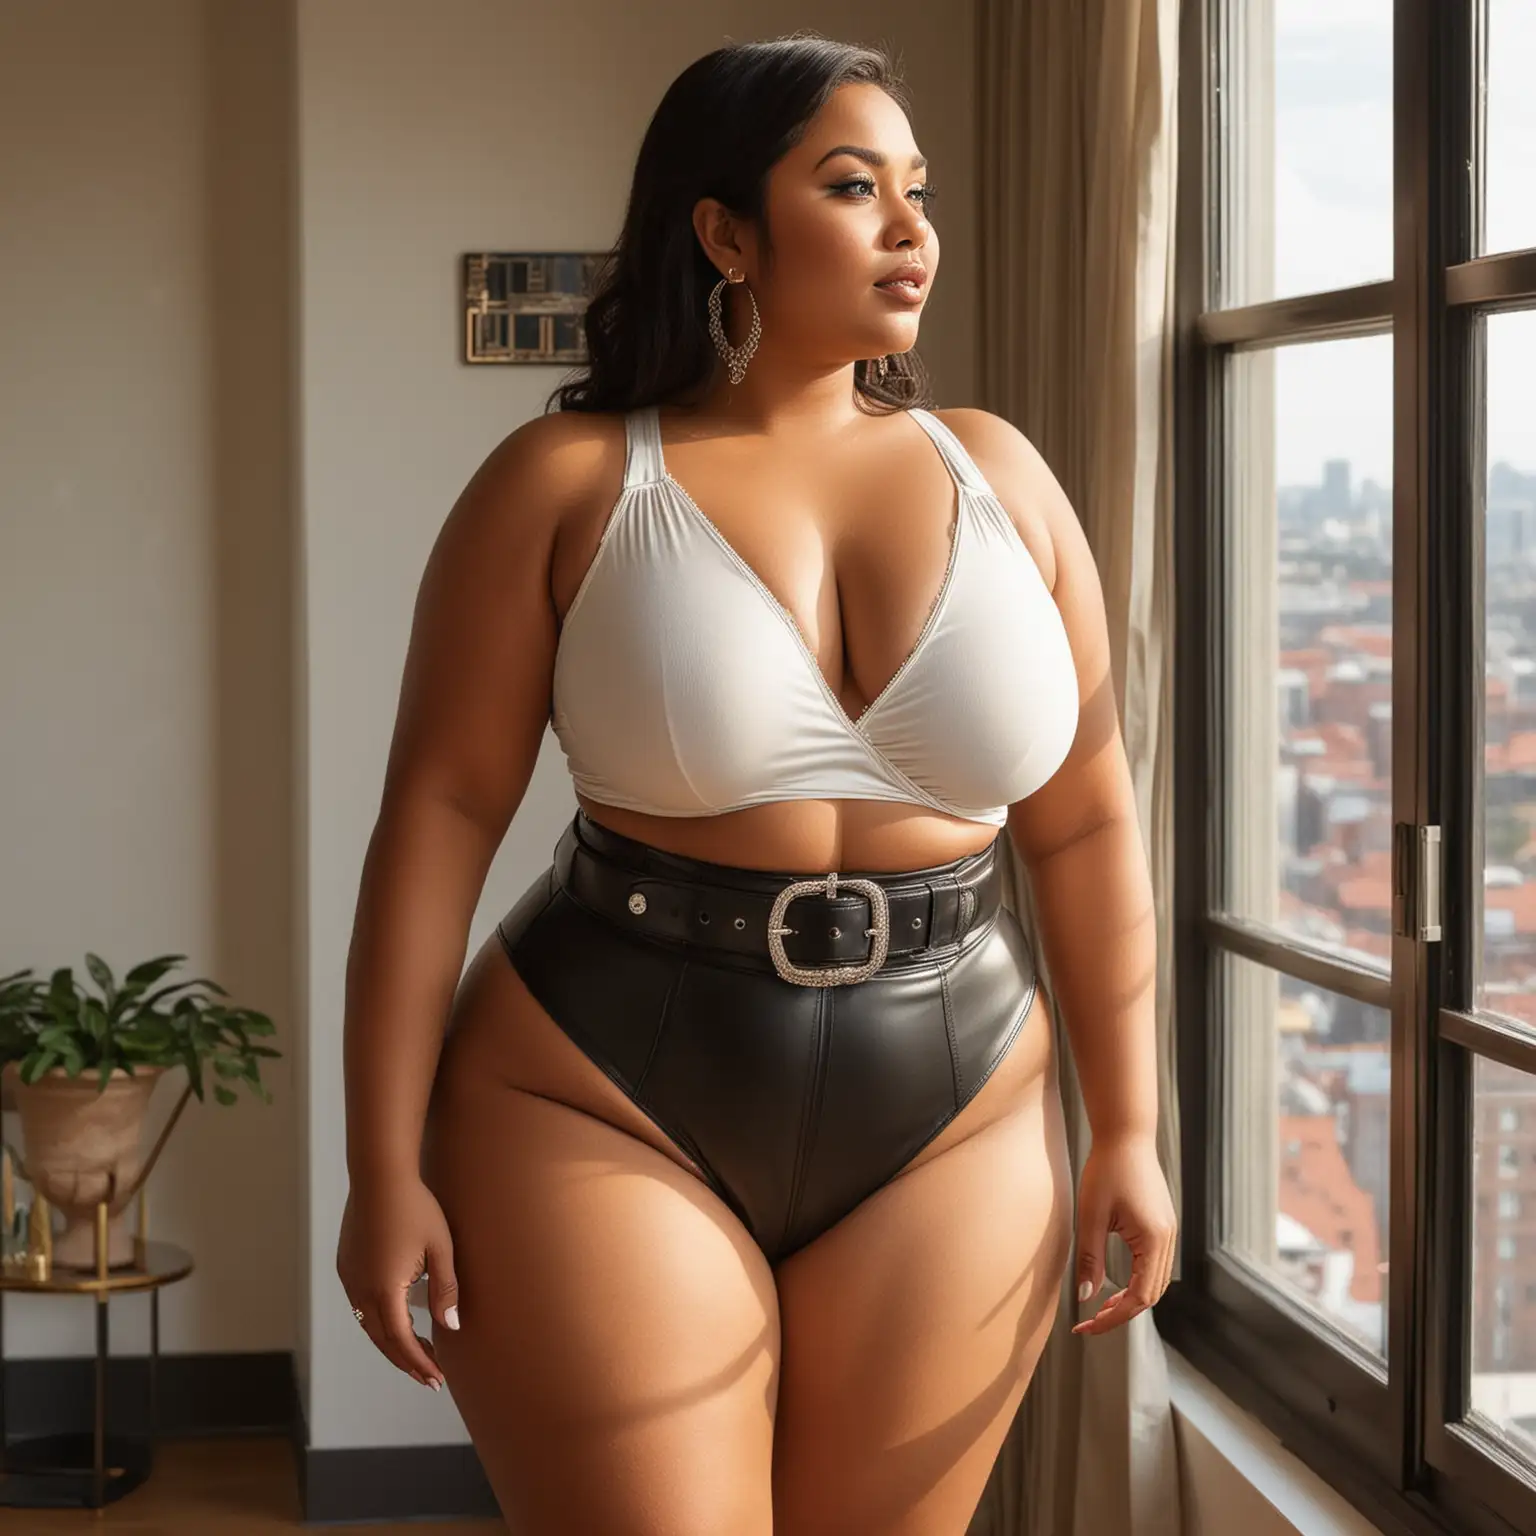 Sensational Bangladeshi BBW Queen Flaunting Confidence in Luxurious Penthouse